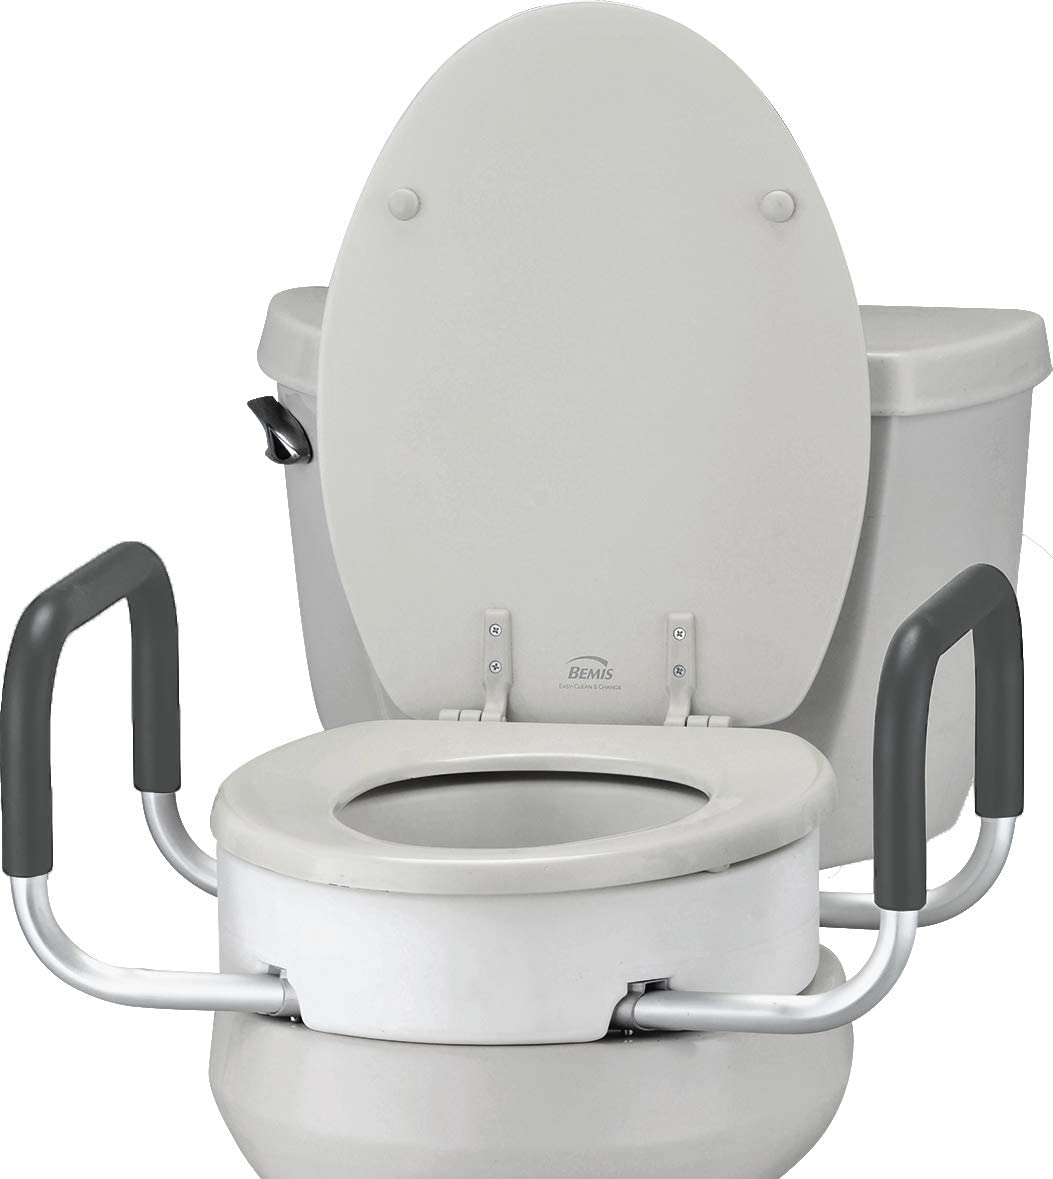 10 Best Toilet Seat Risers 2016 